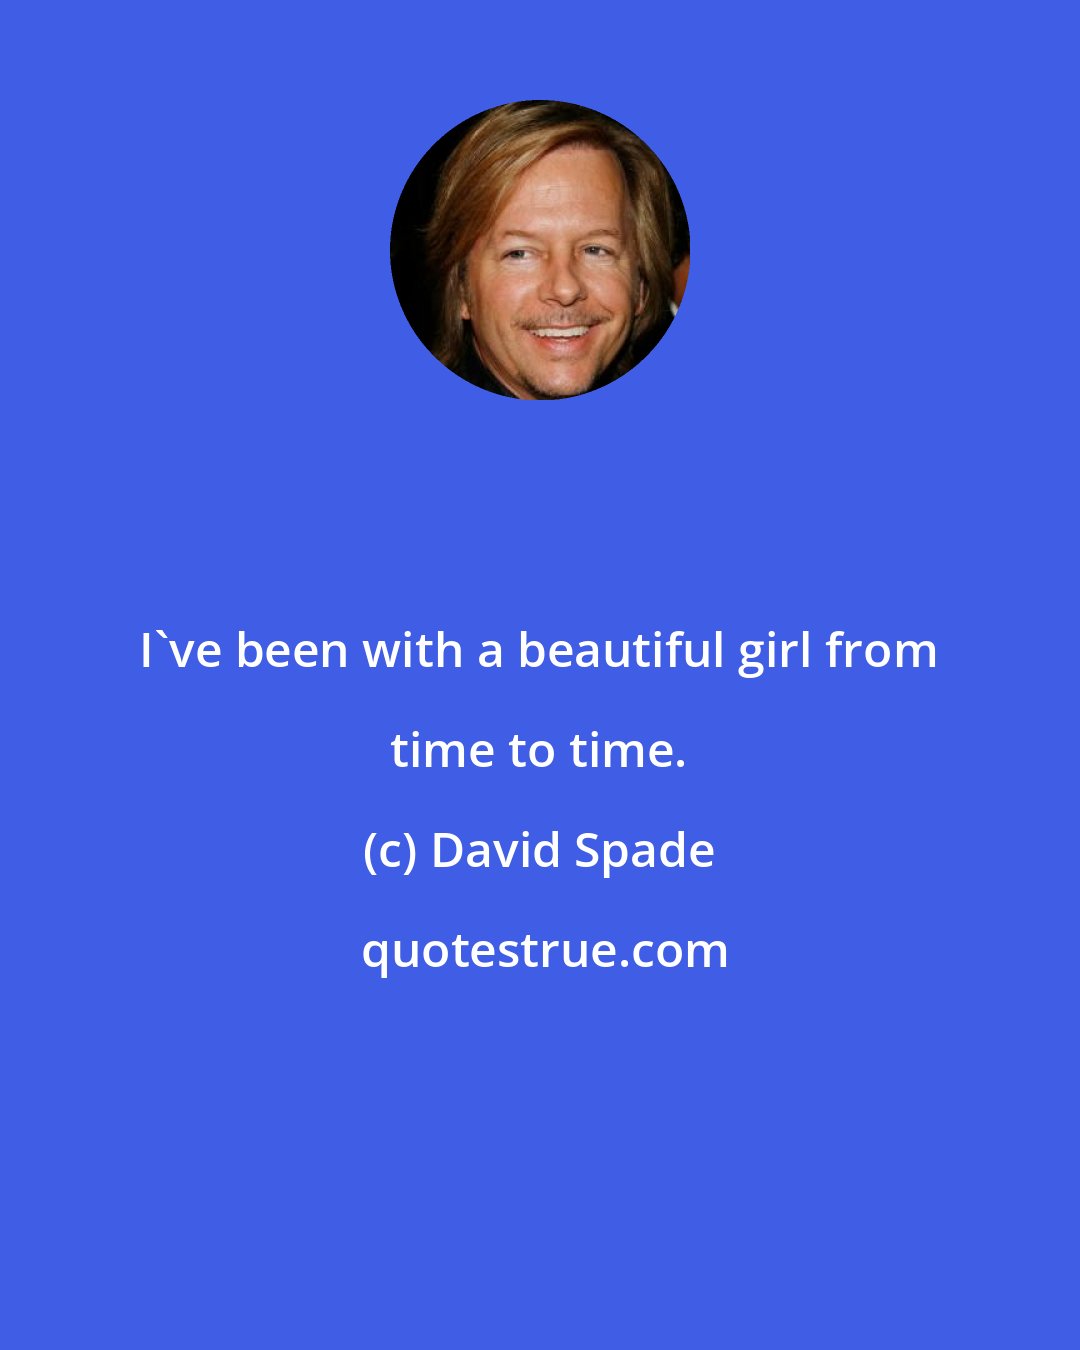 David Spade: I've been with a beautiful girl from time to time.